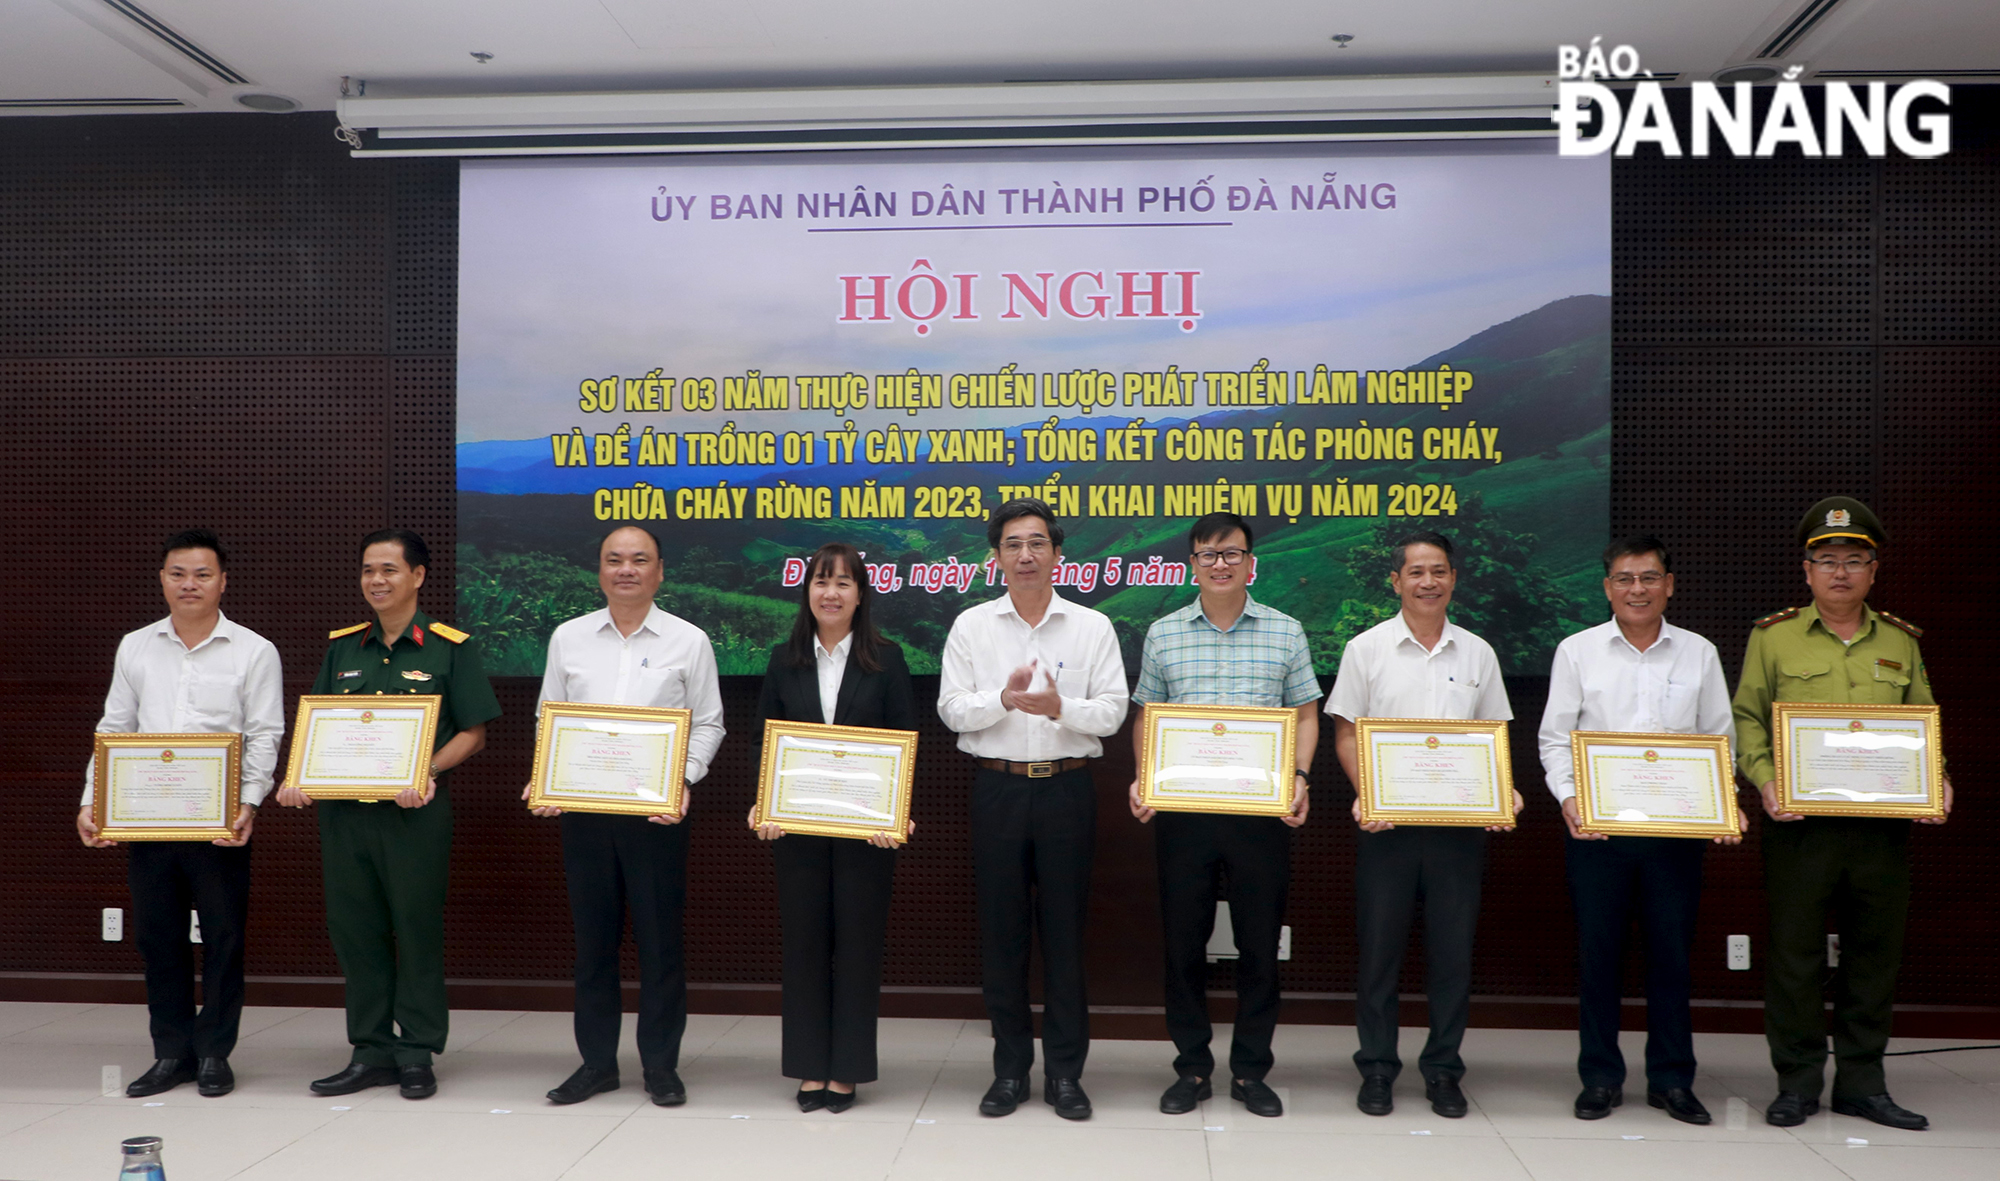 More than 1 million trees planted in Da Nang during 2021-2023 period